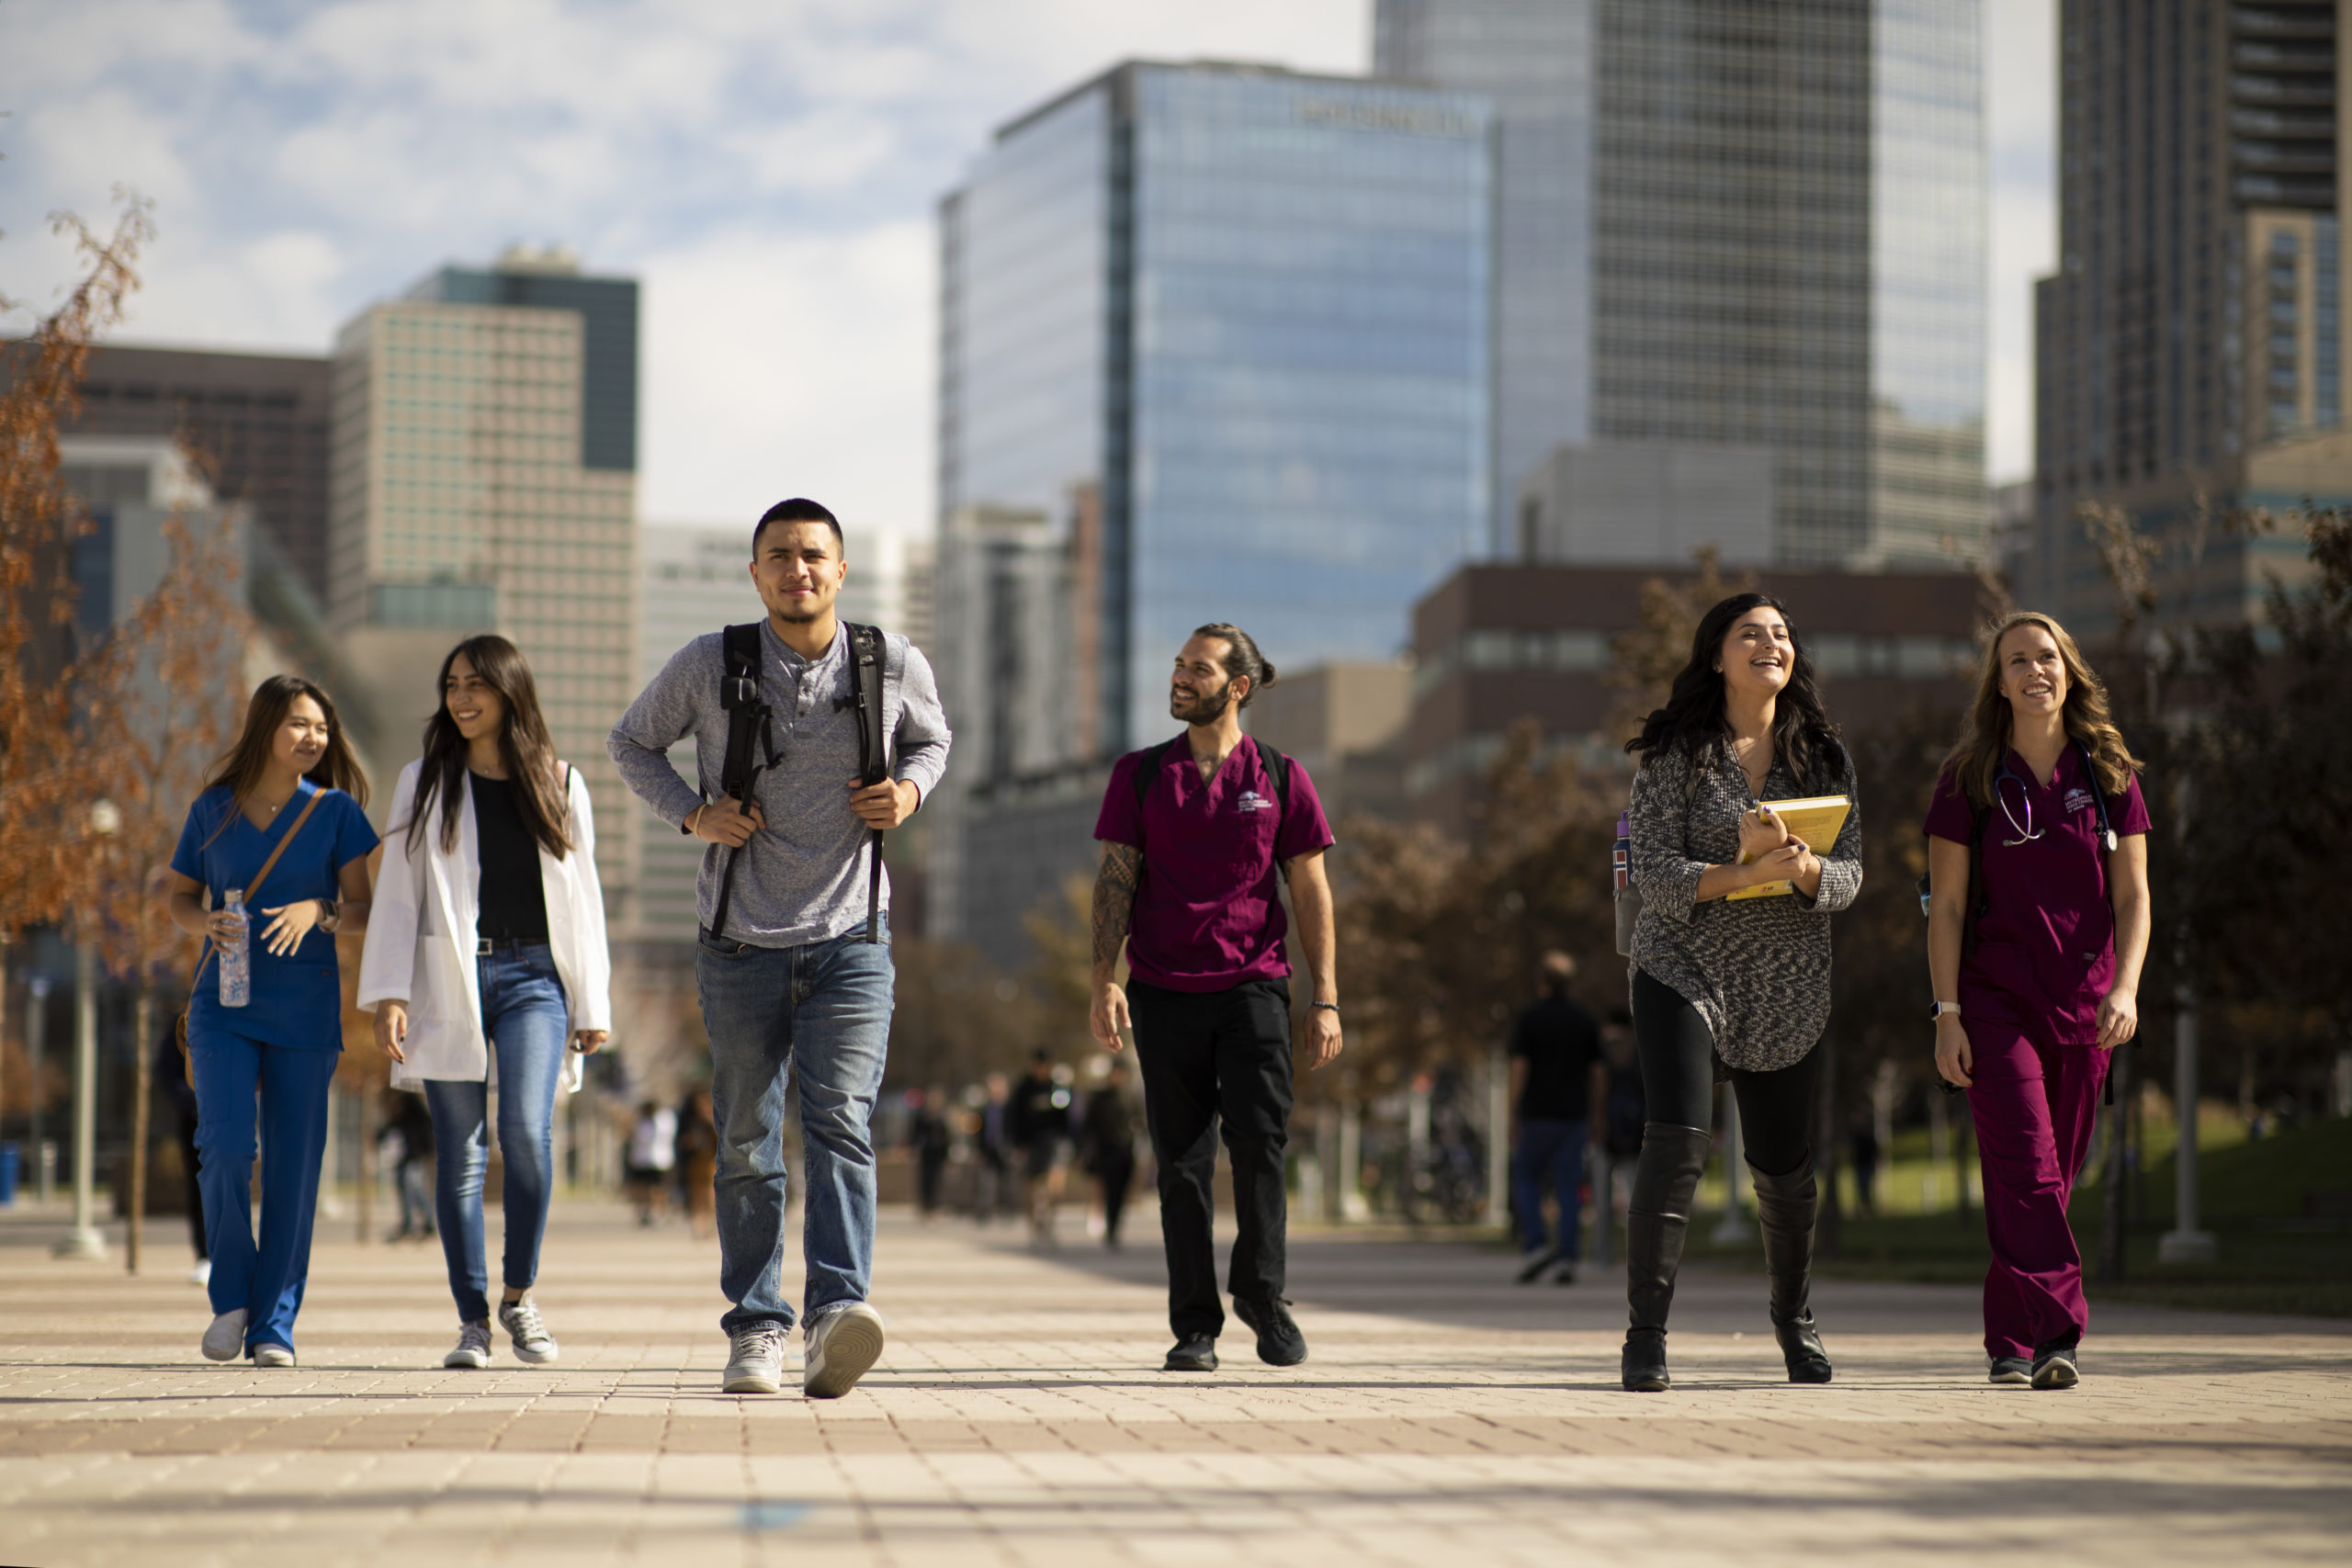 students walking through campus with downtown Denver in the background